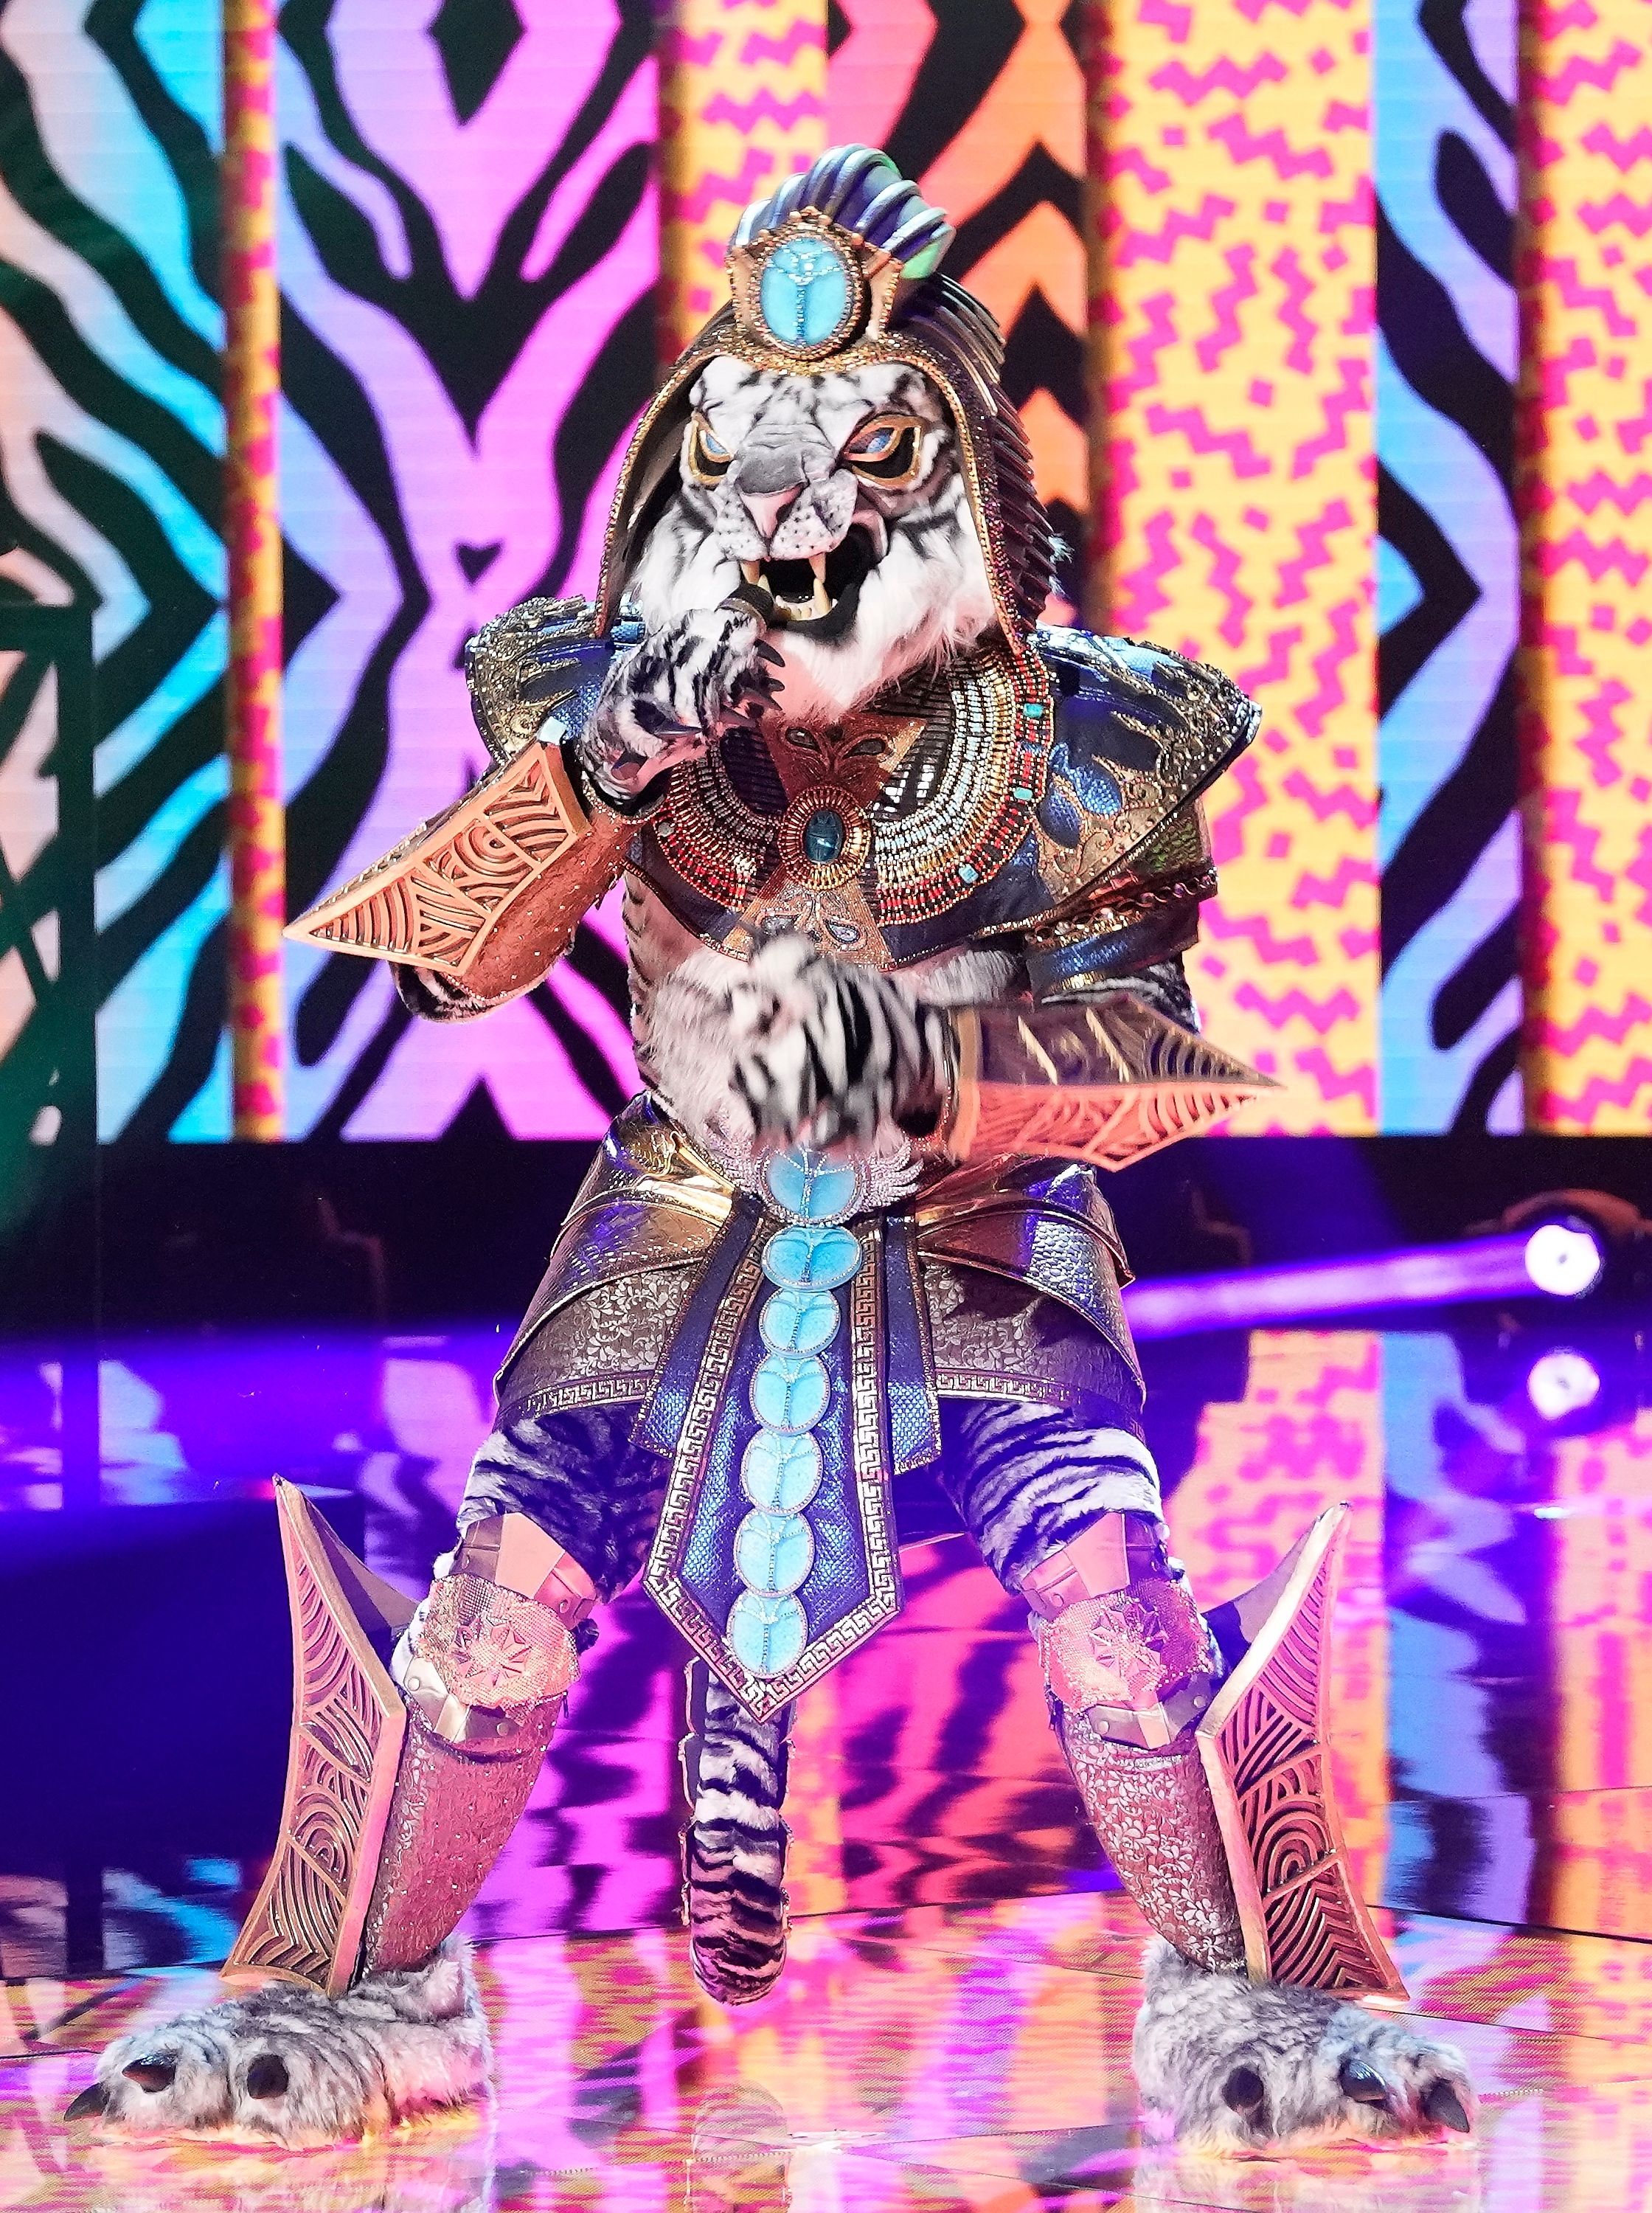 Who Is The White Tiger On The Masked Singer? — Guesses and Clues picture